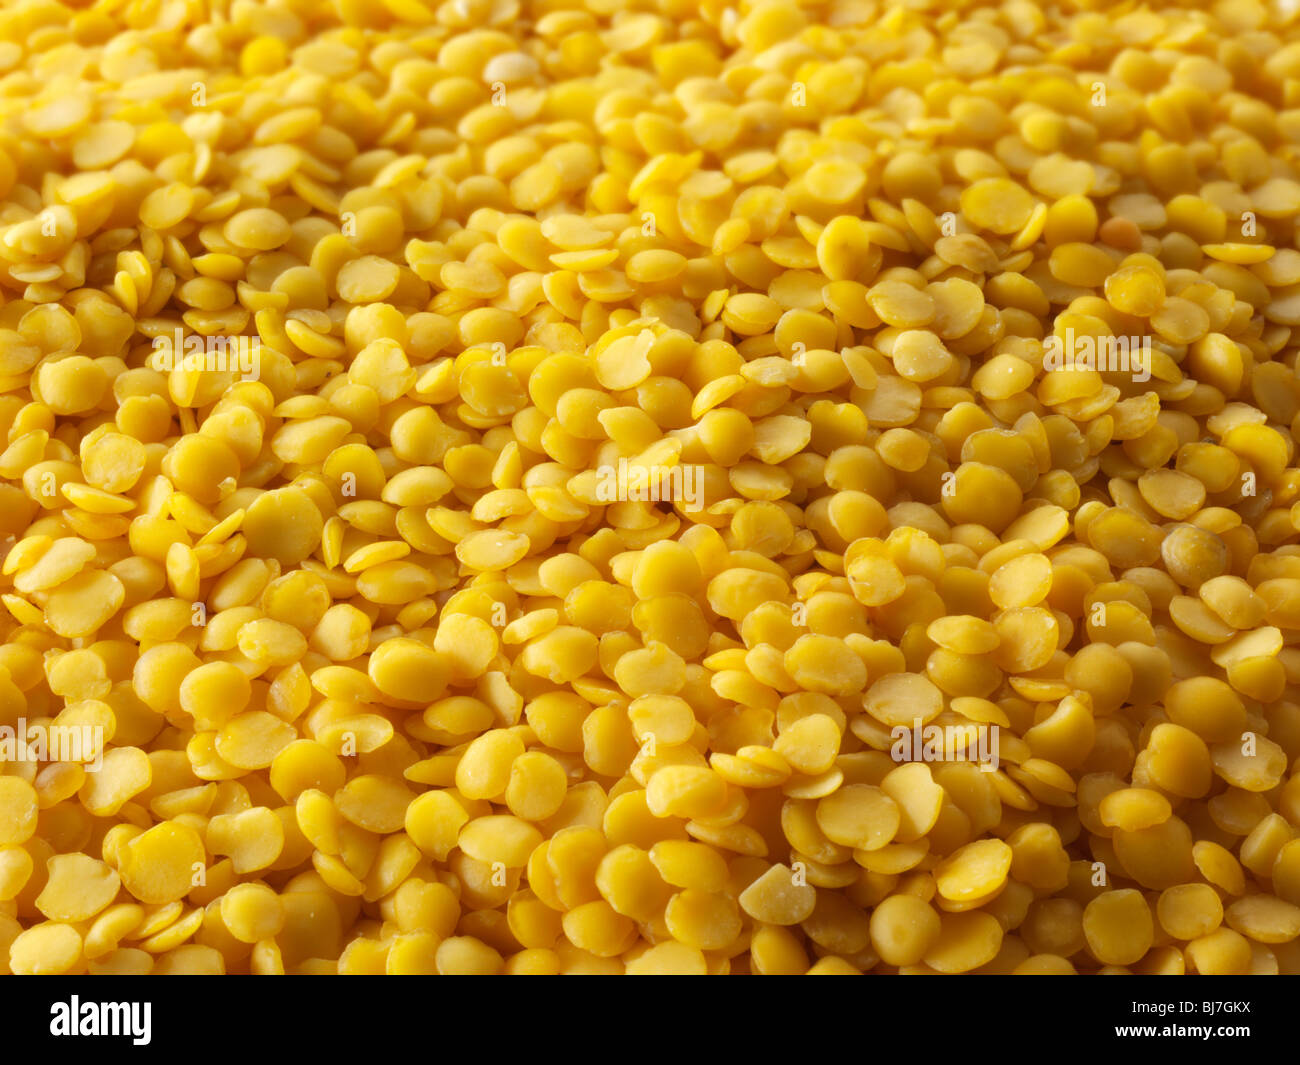 Whole dried yellow lentil beans - close up full frame top shot. Stock Photo